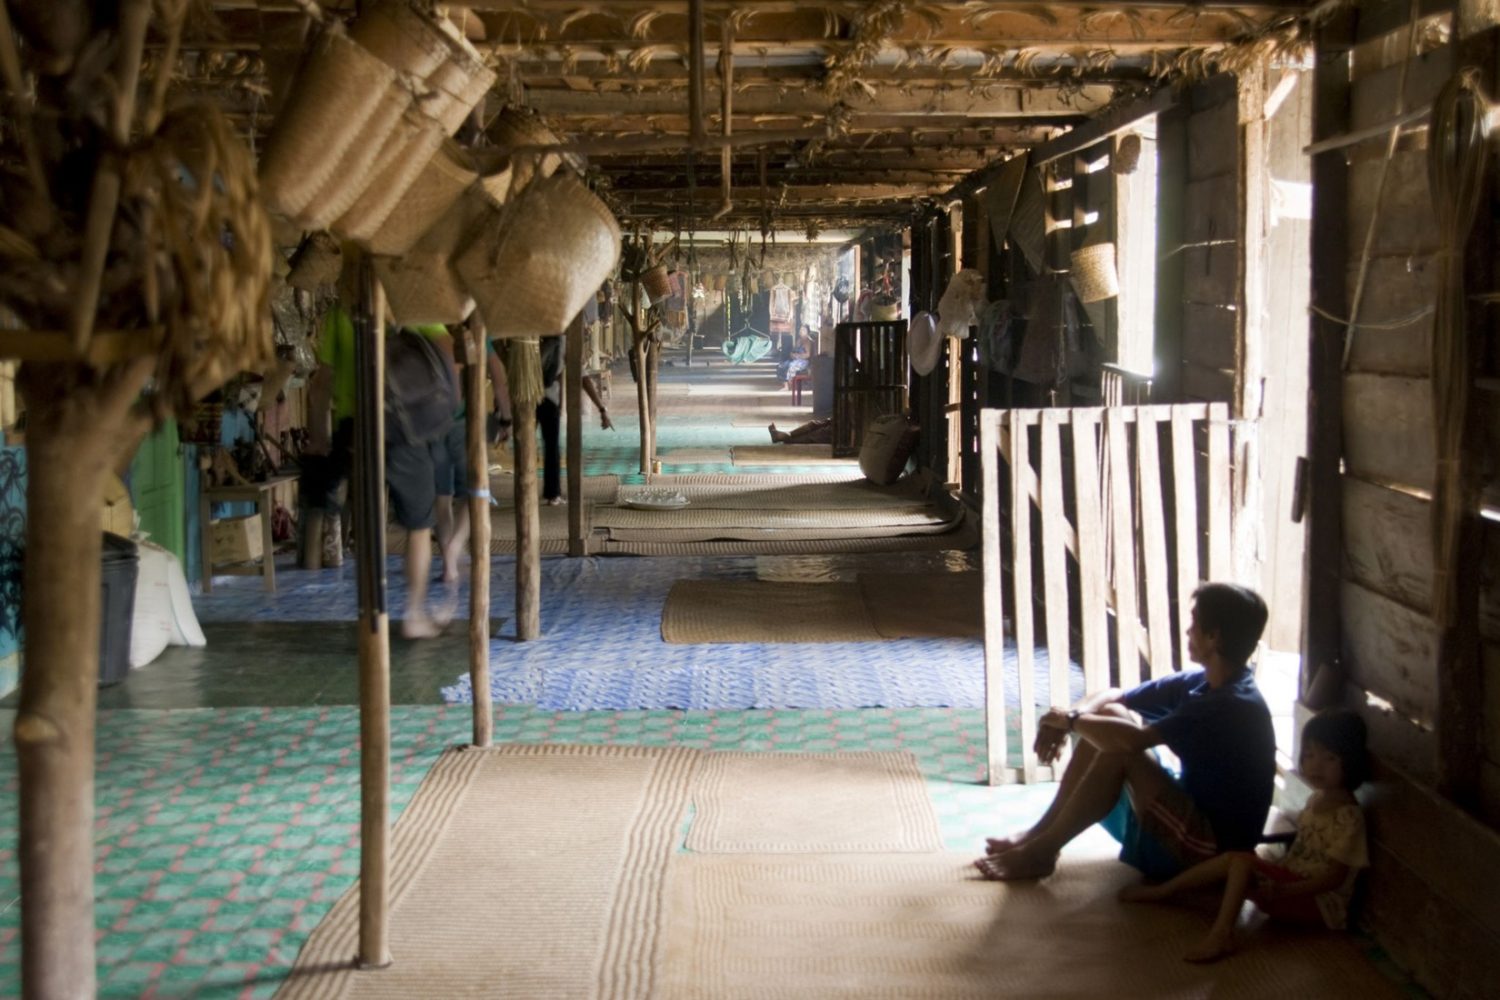 A ruai is a long communal space in a traditional longhouse Image source: Robas